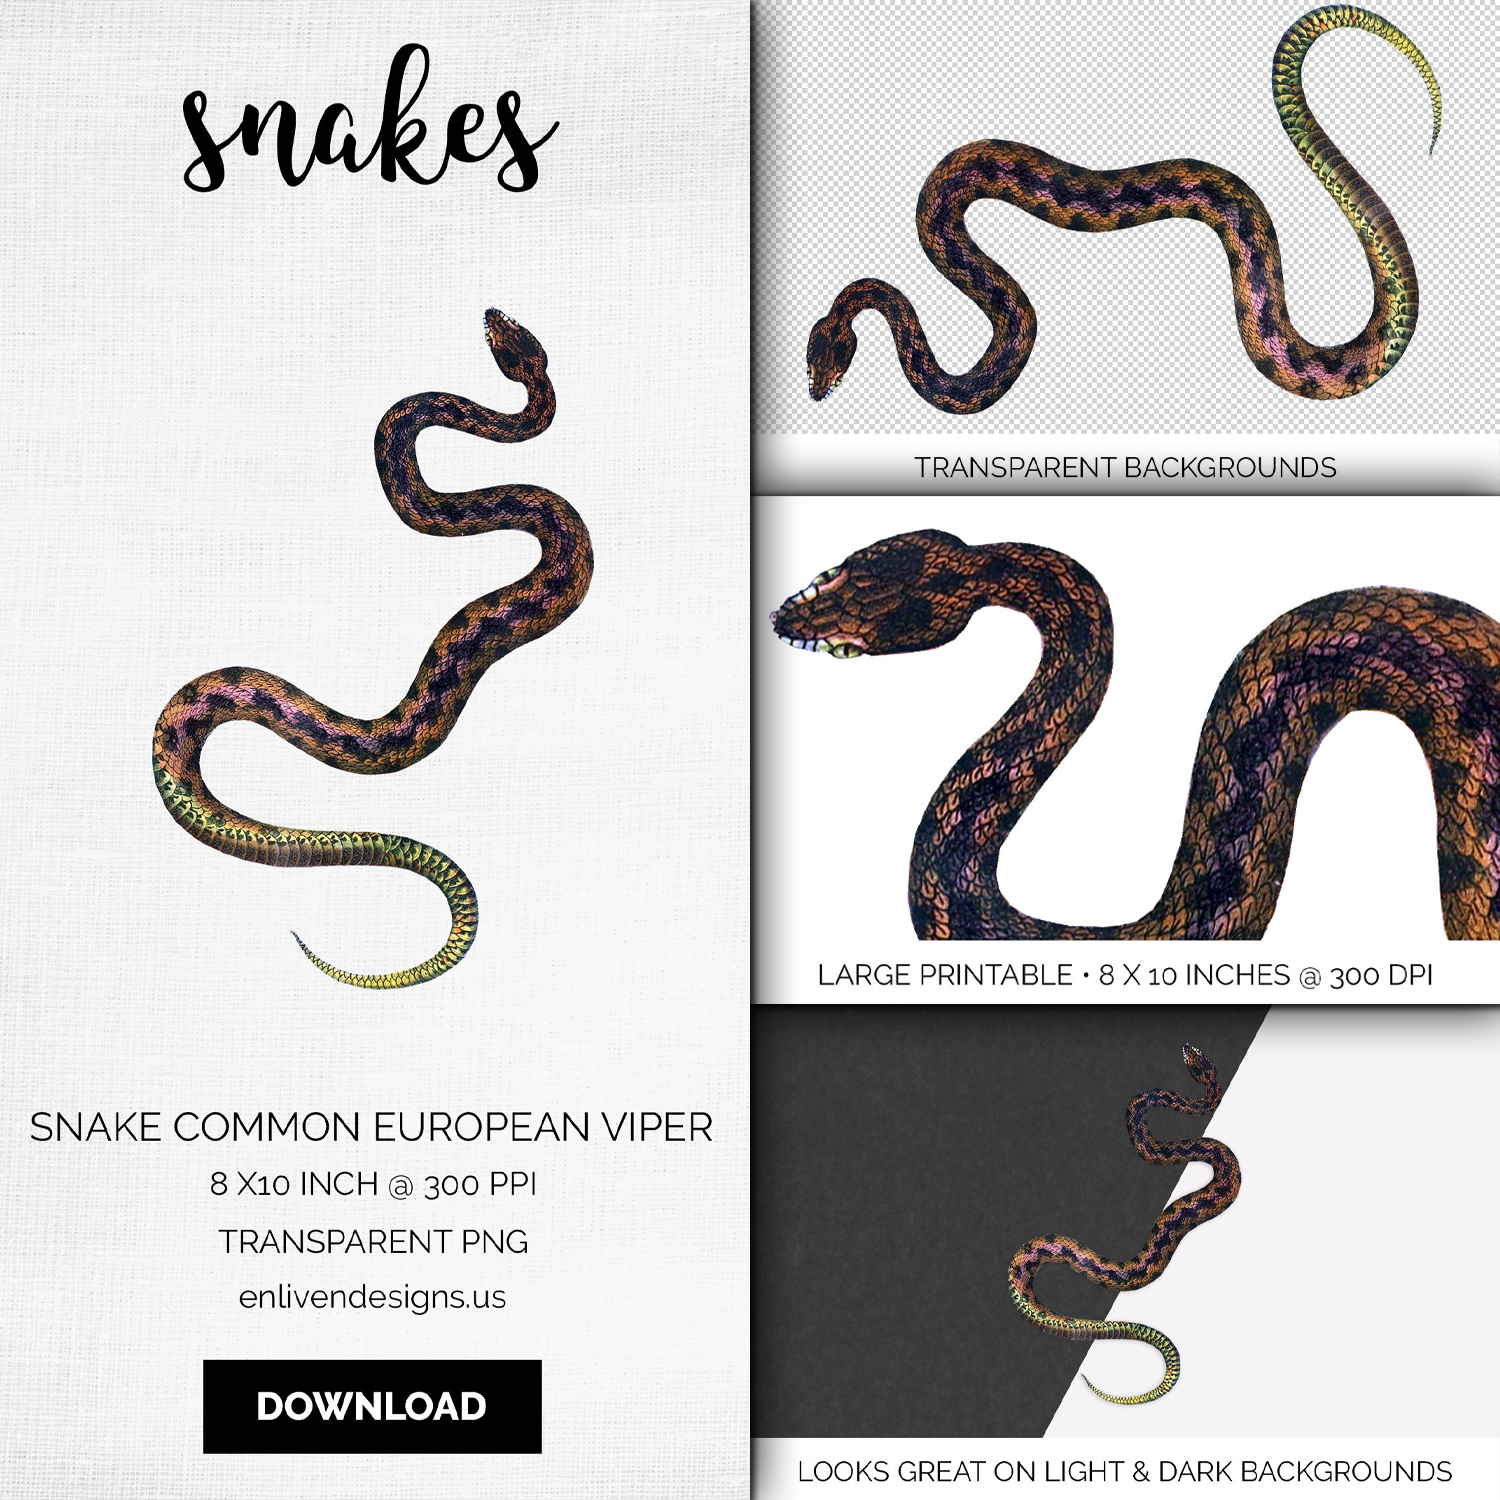 Cover images of vintage common european viper.